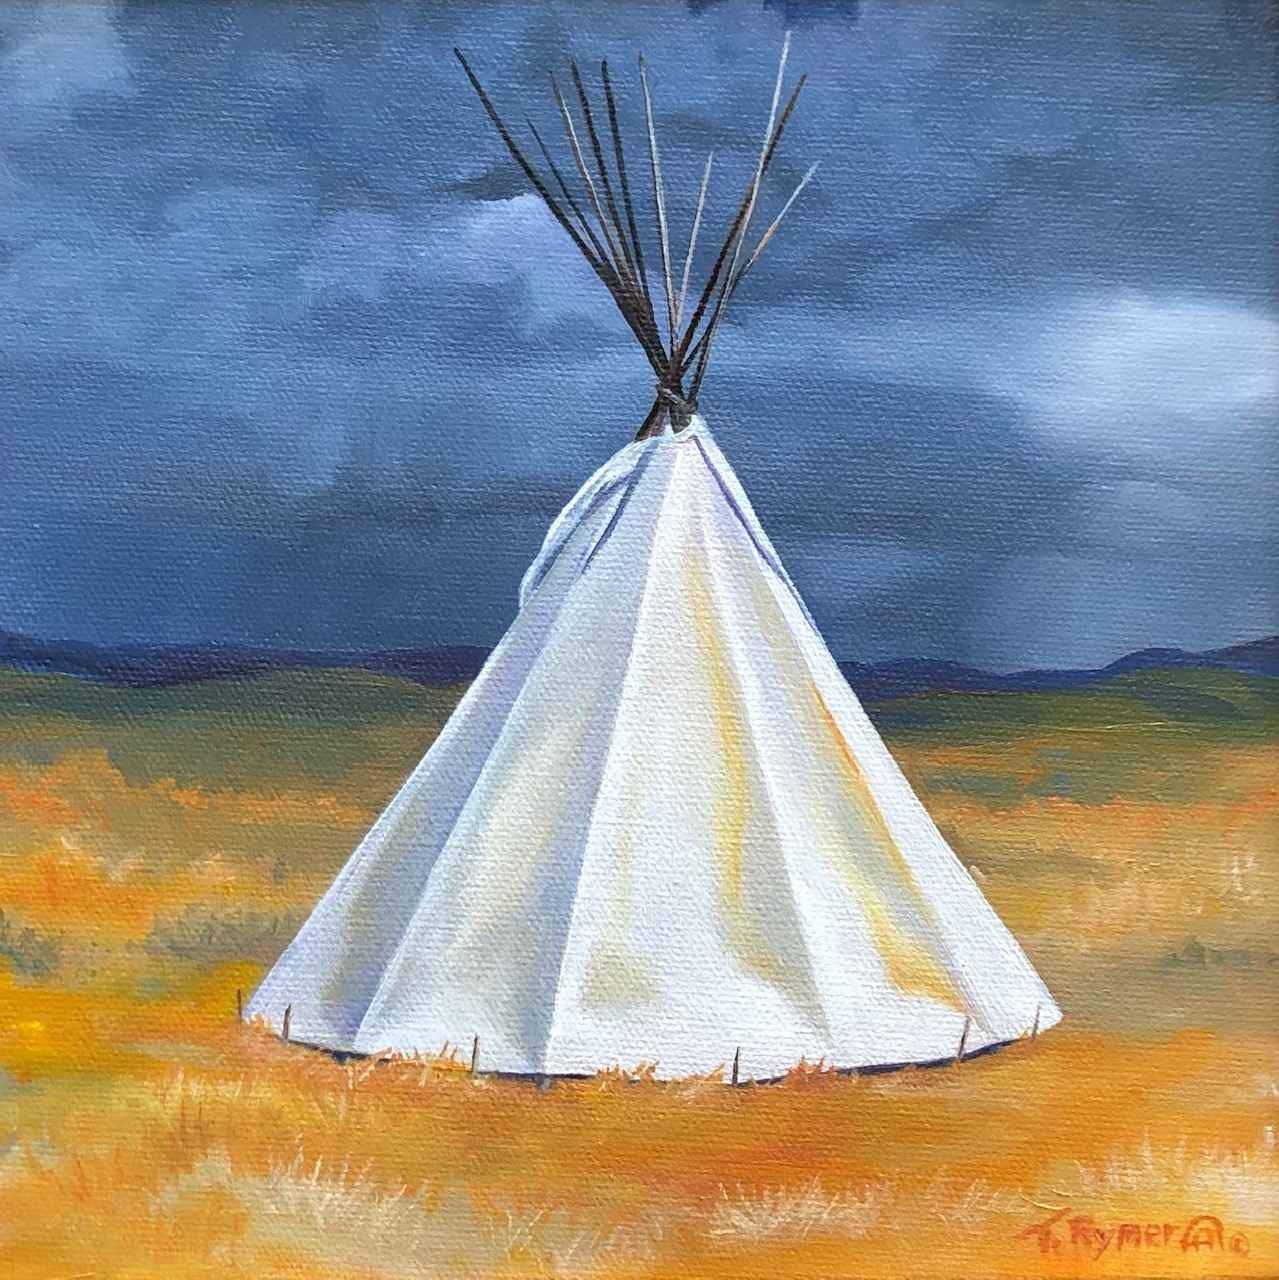 White teepee painting on a golden field with a dark sky. Tamara Rymer Painting at Sorrel Sky Gallery.